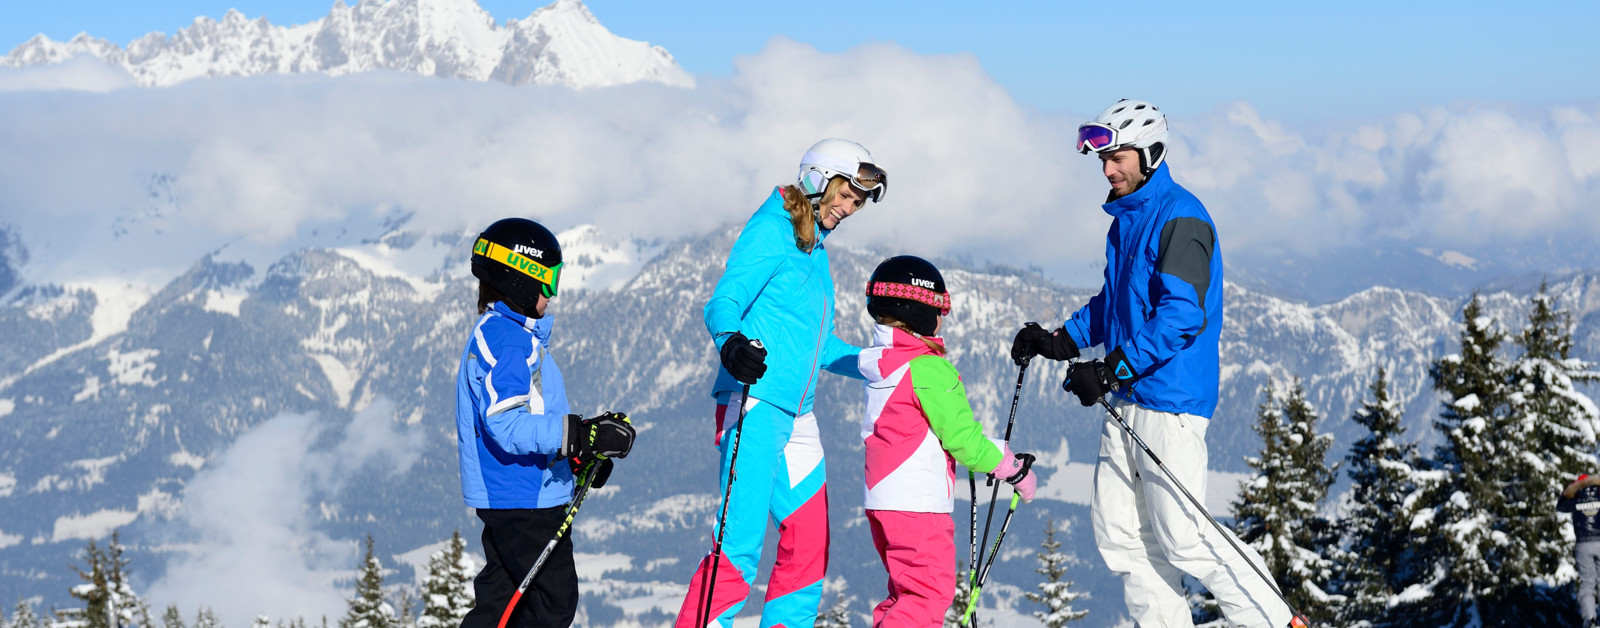 Ski & Equipment Hire Right by the Pistes with INTERSPORT Rent